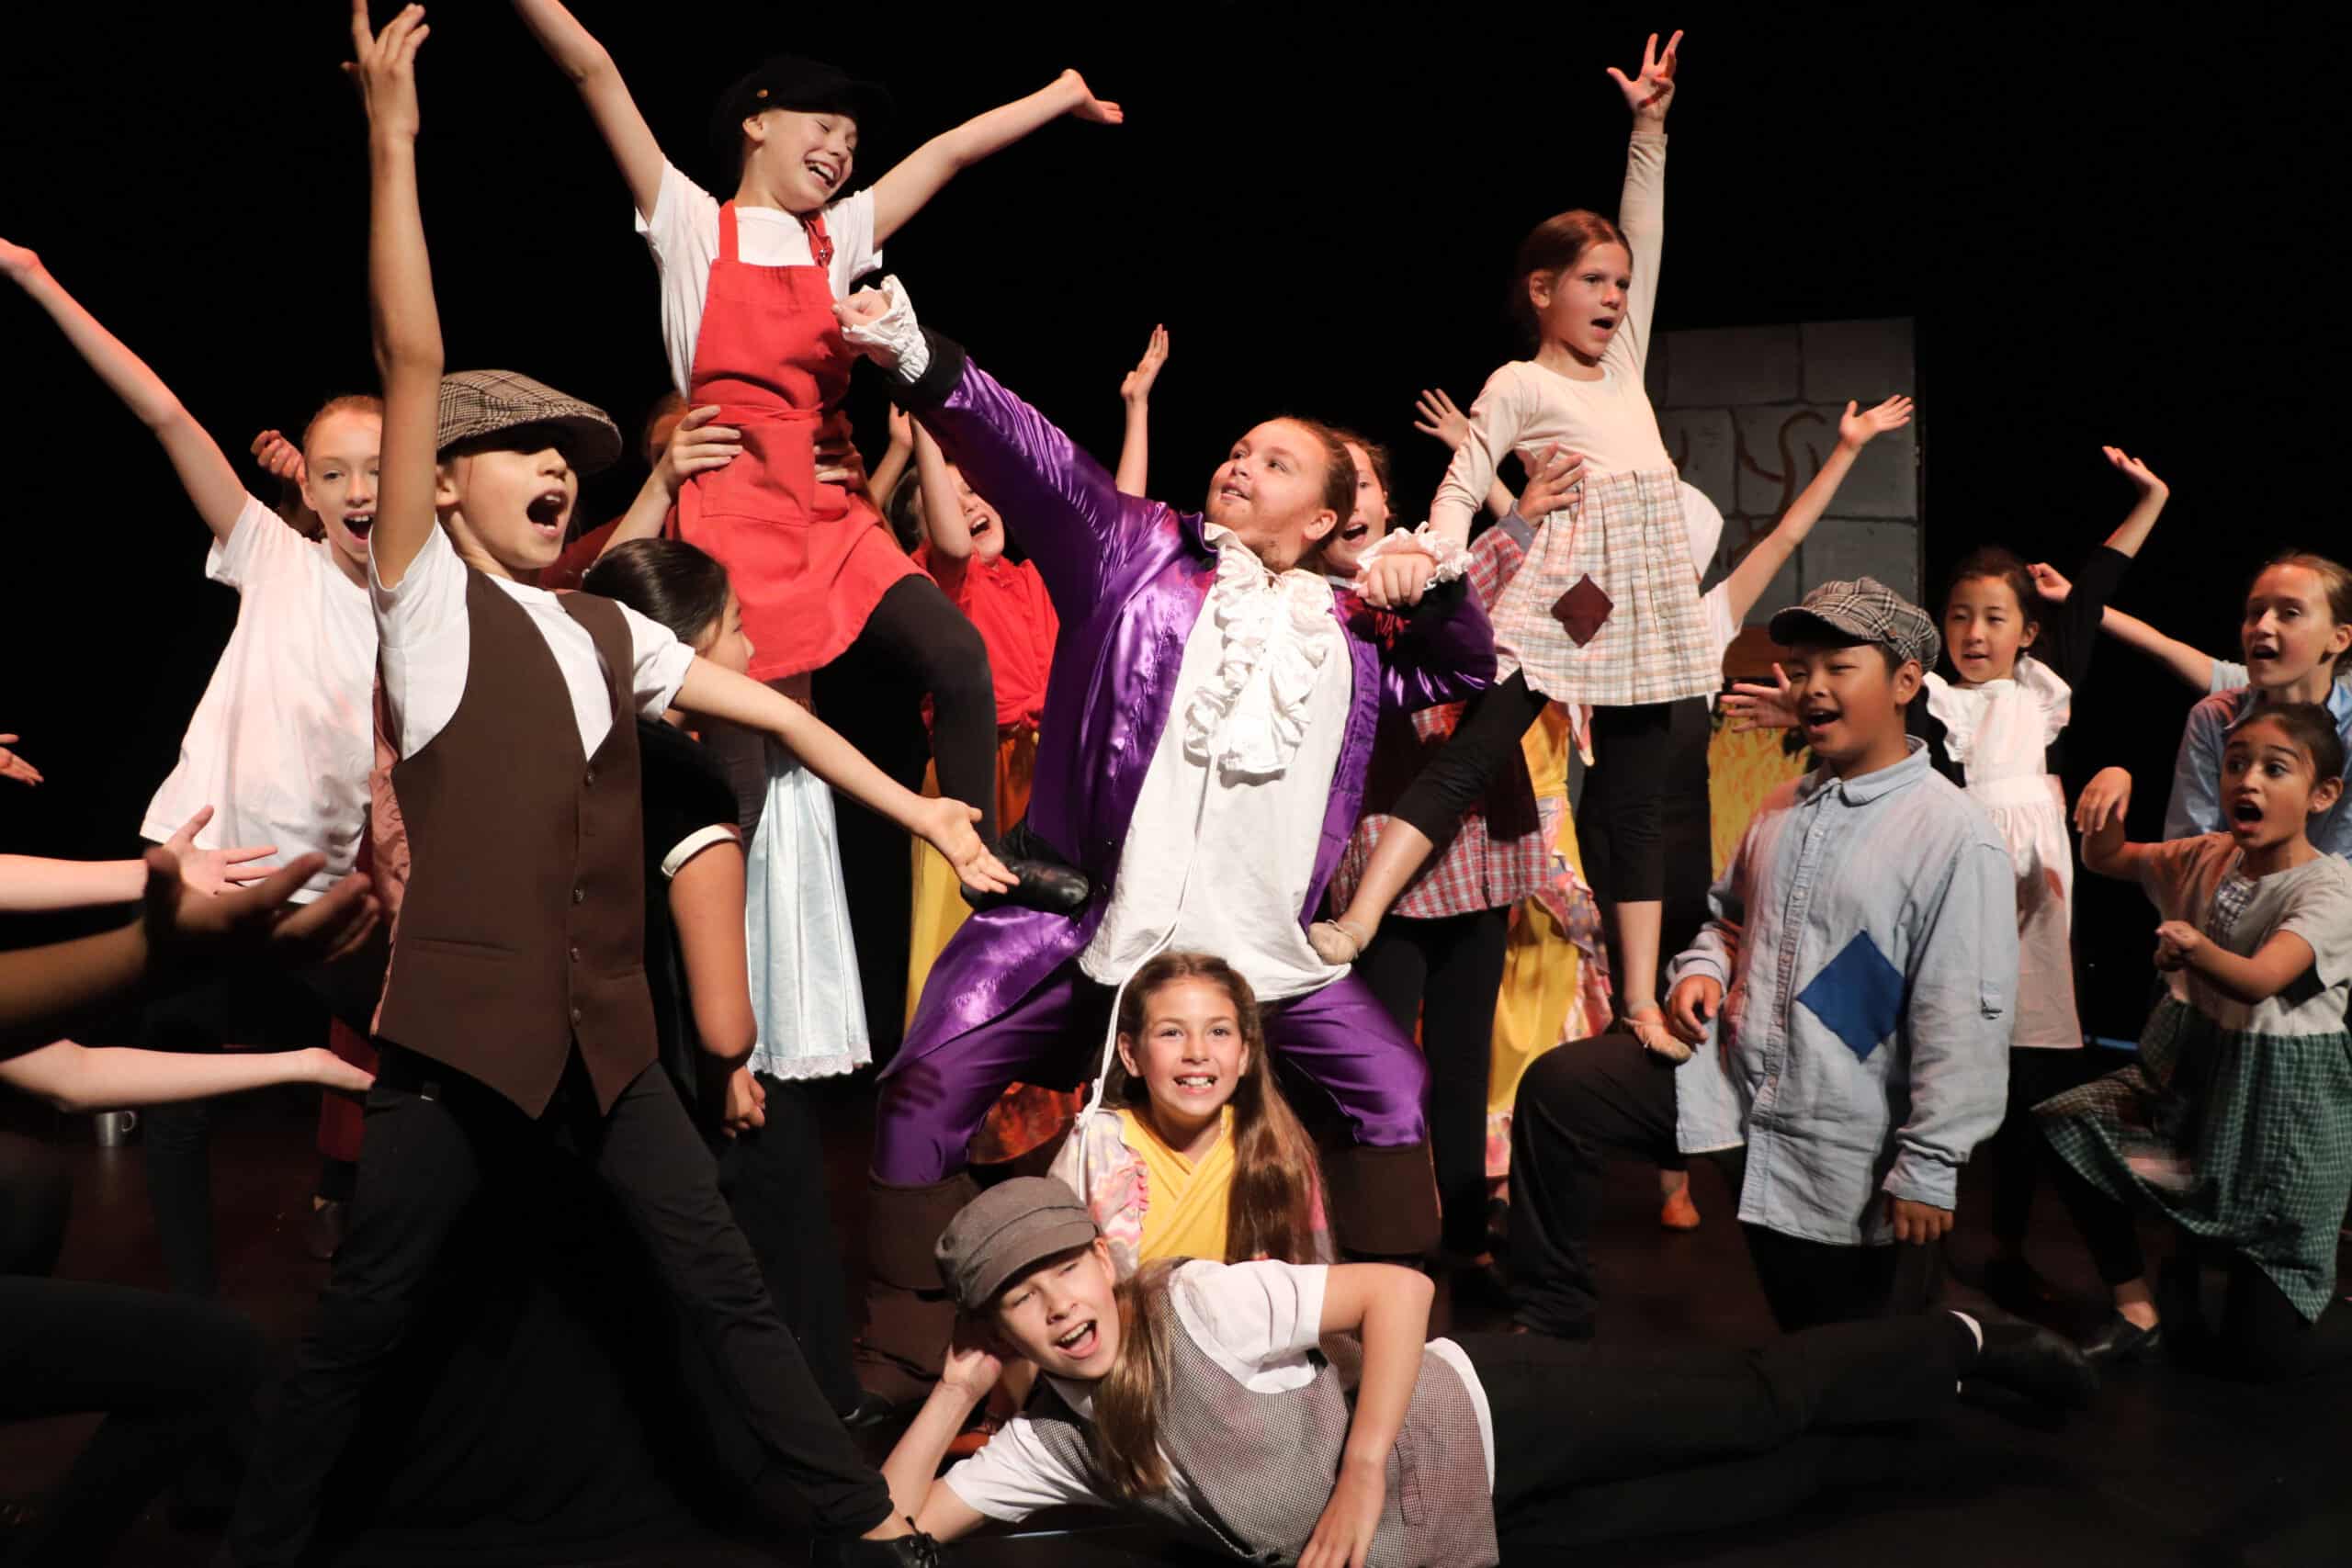 NO TWO THEATRE CAMPS ARE EVER THE SAME AT LIGHTS UP THEATRE SCHOOLS. - BC Parent Newsmagazine